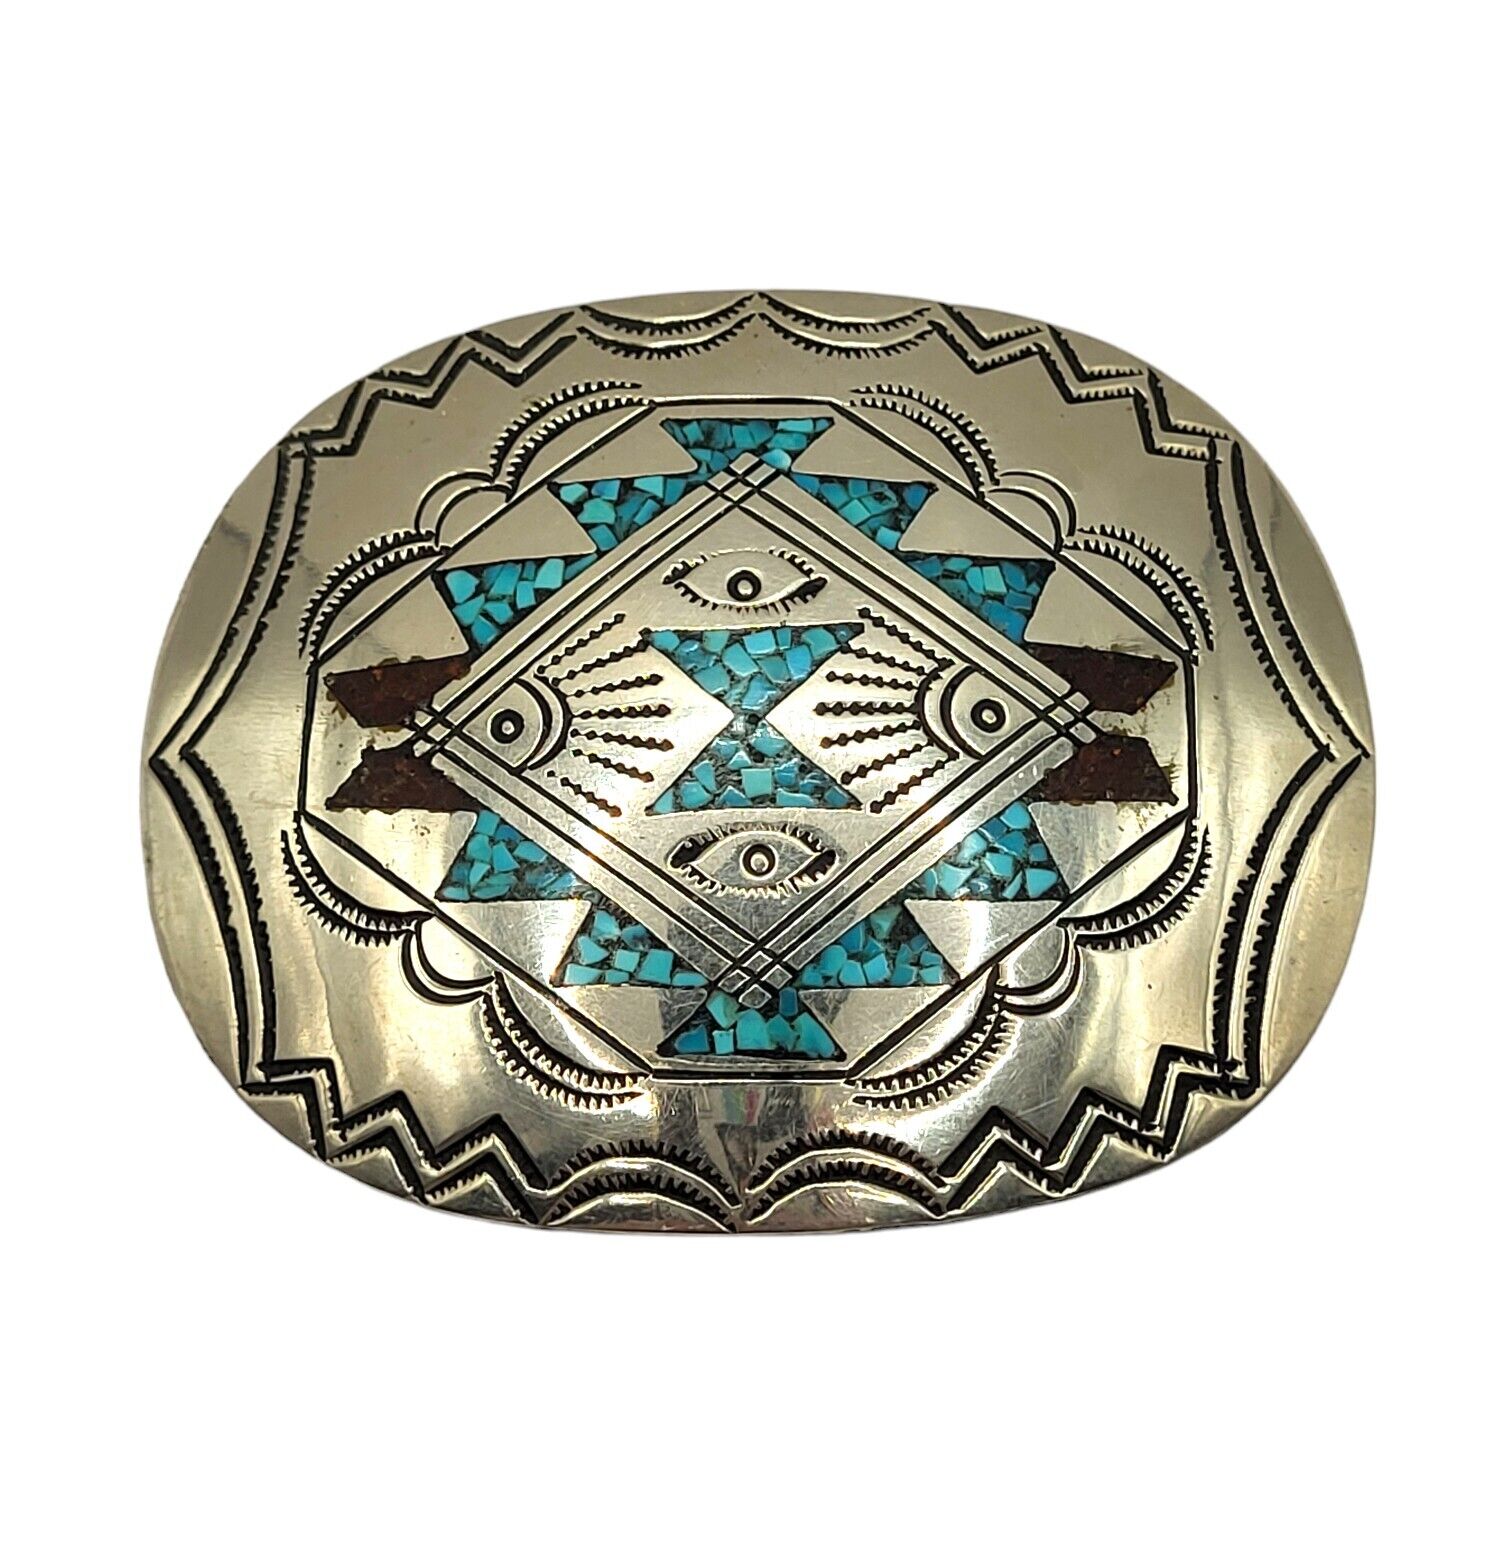 Signed J. Nezzie Navajo Native American Turquoise Coral Inlaid Belt Buckle